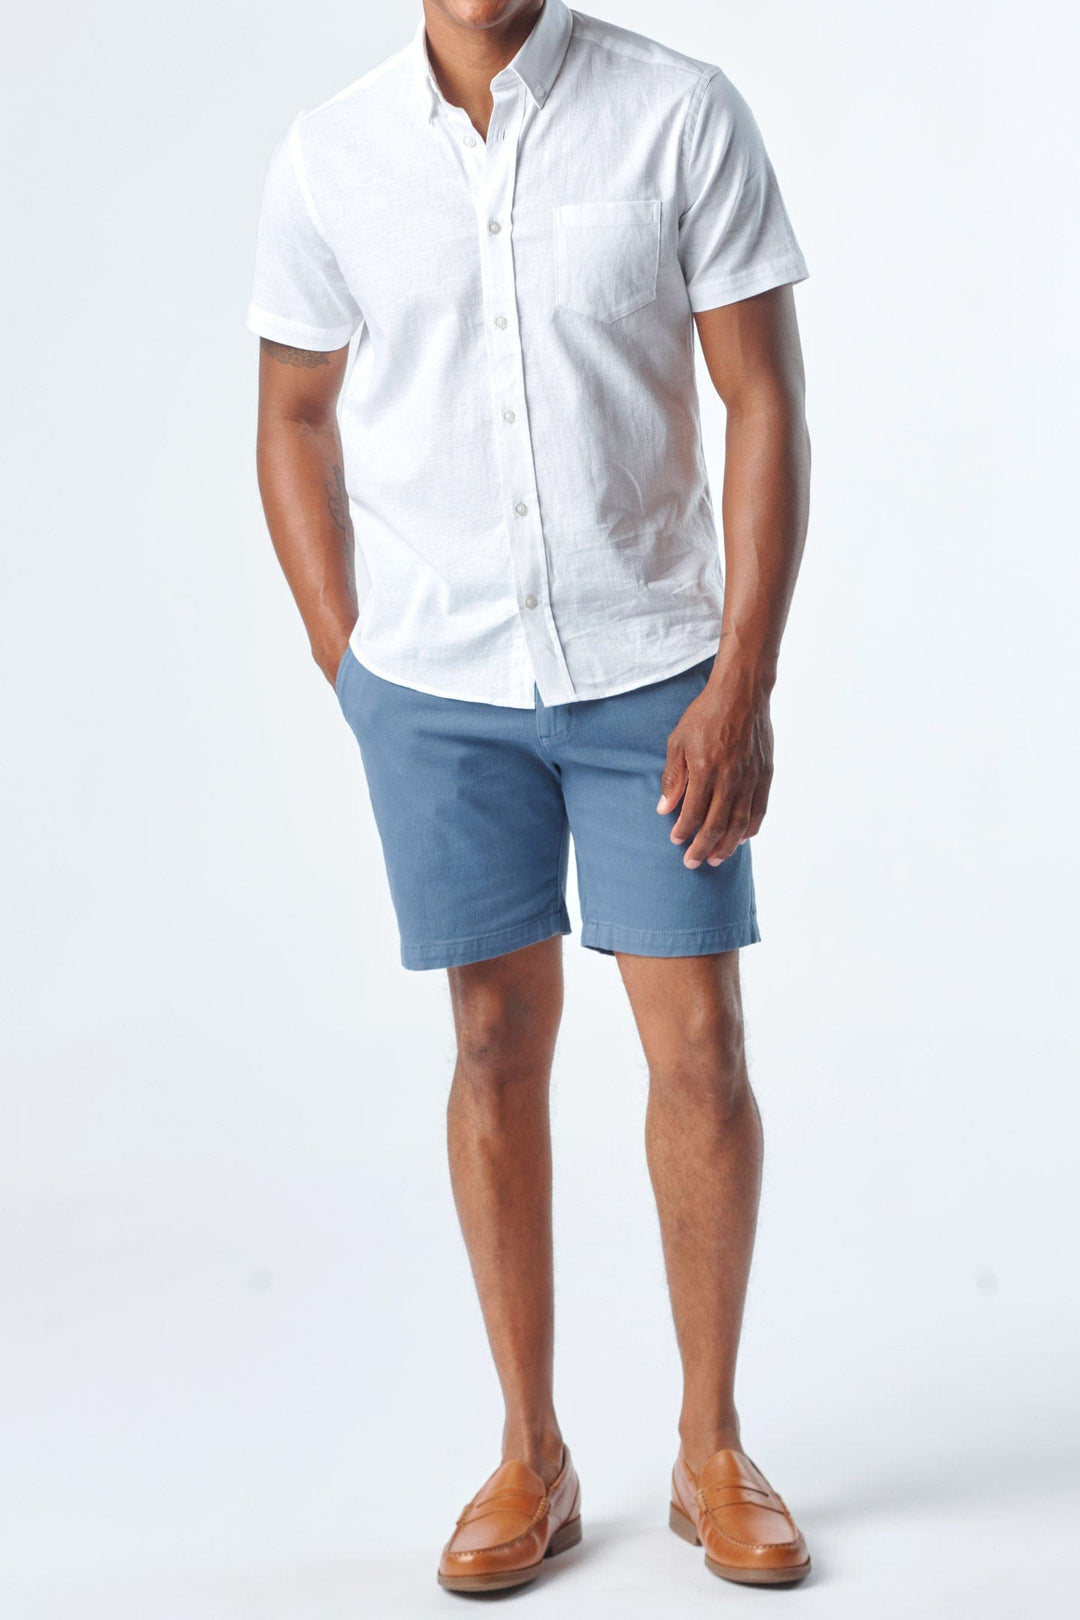 Buy Deep Blue Stretch Washed Chino Short for Short Men | Ash & Erie   Chino Shorts